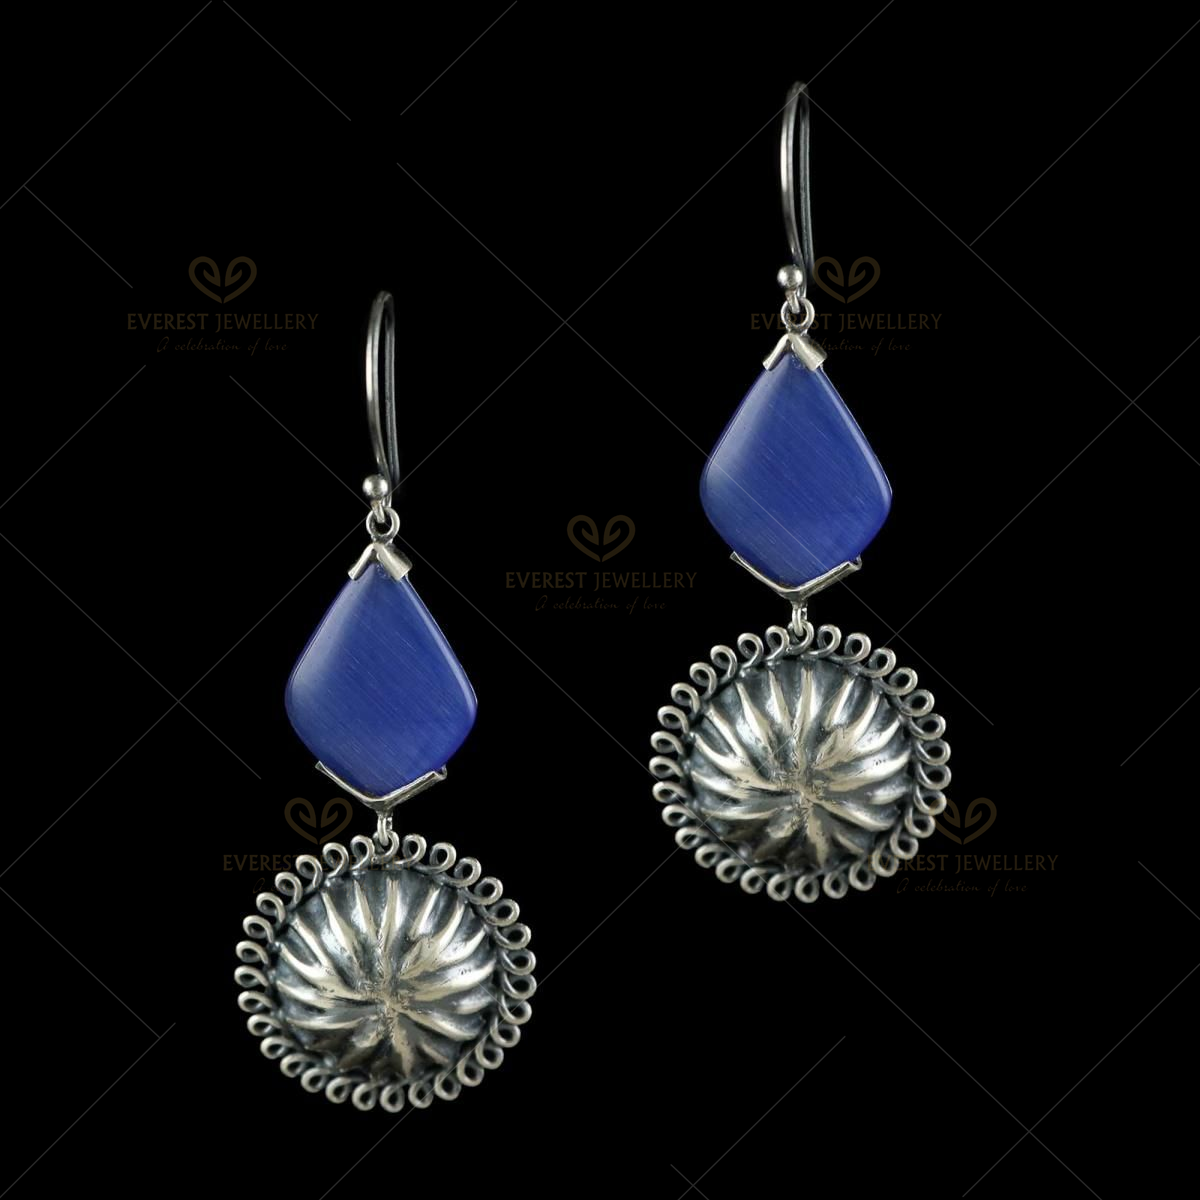 Premium Quality Cz Stone Earrings With White Stone, Highlighted Black Stone  Hanging White Pearls Earring Buy Online